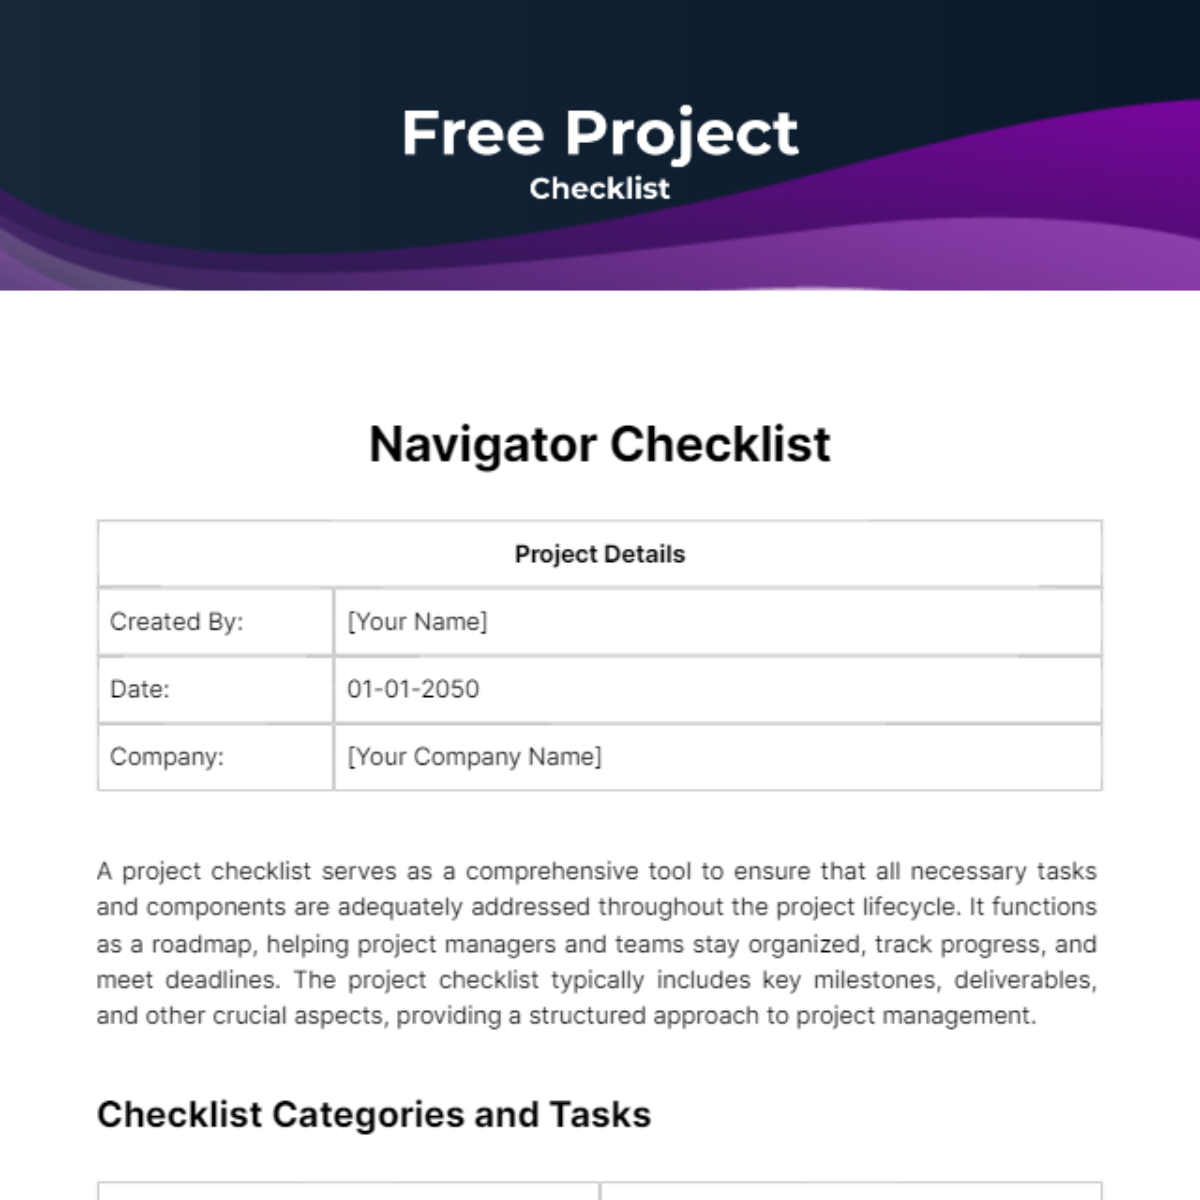 Project Checklist Template